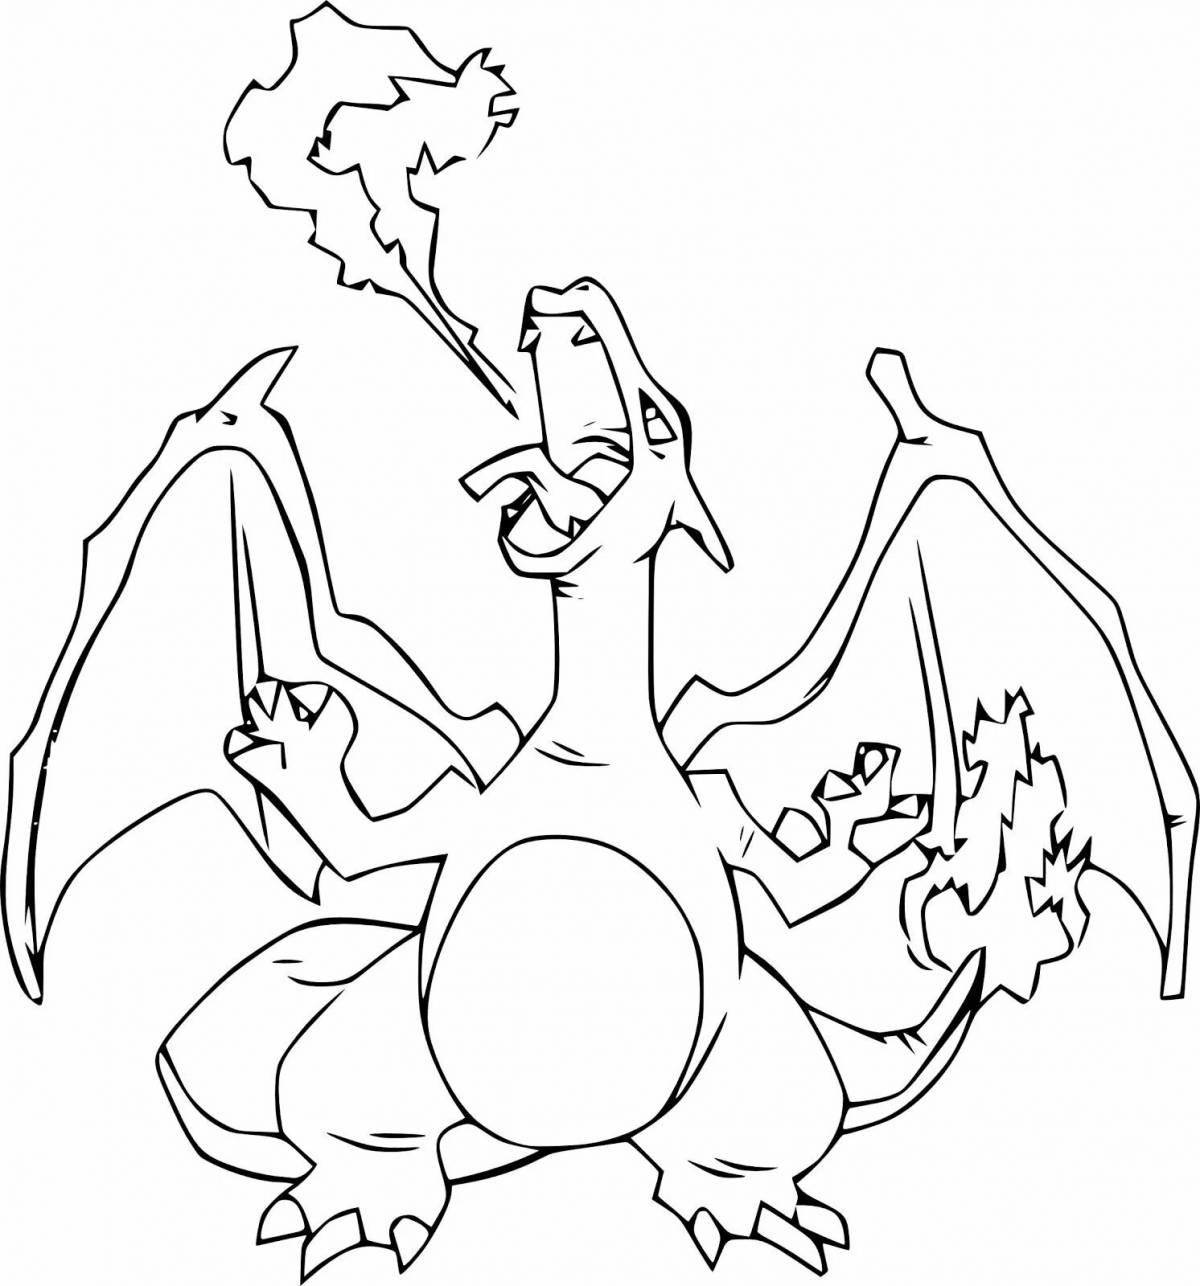 Charizard deluxe coloring book